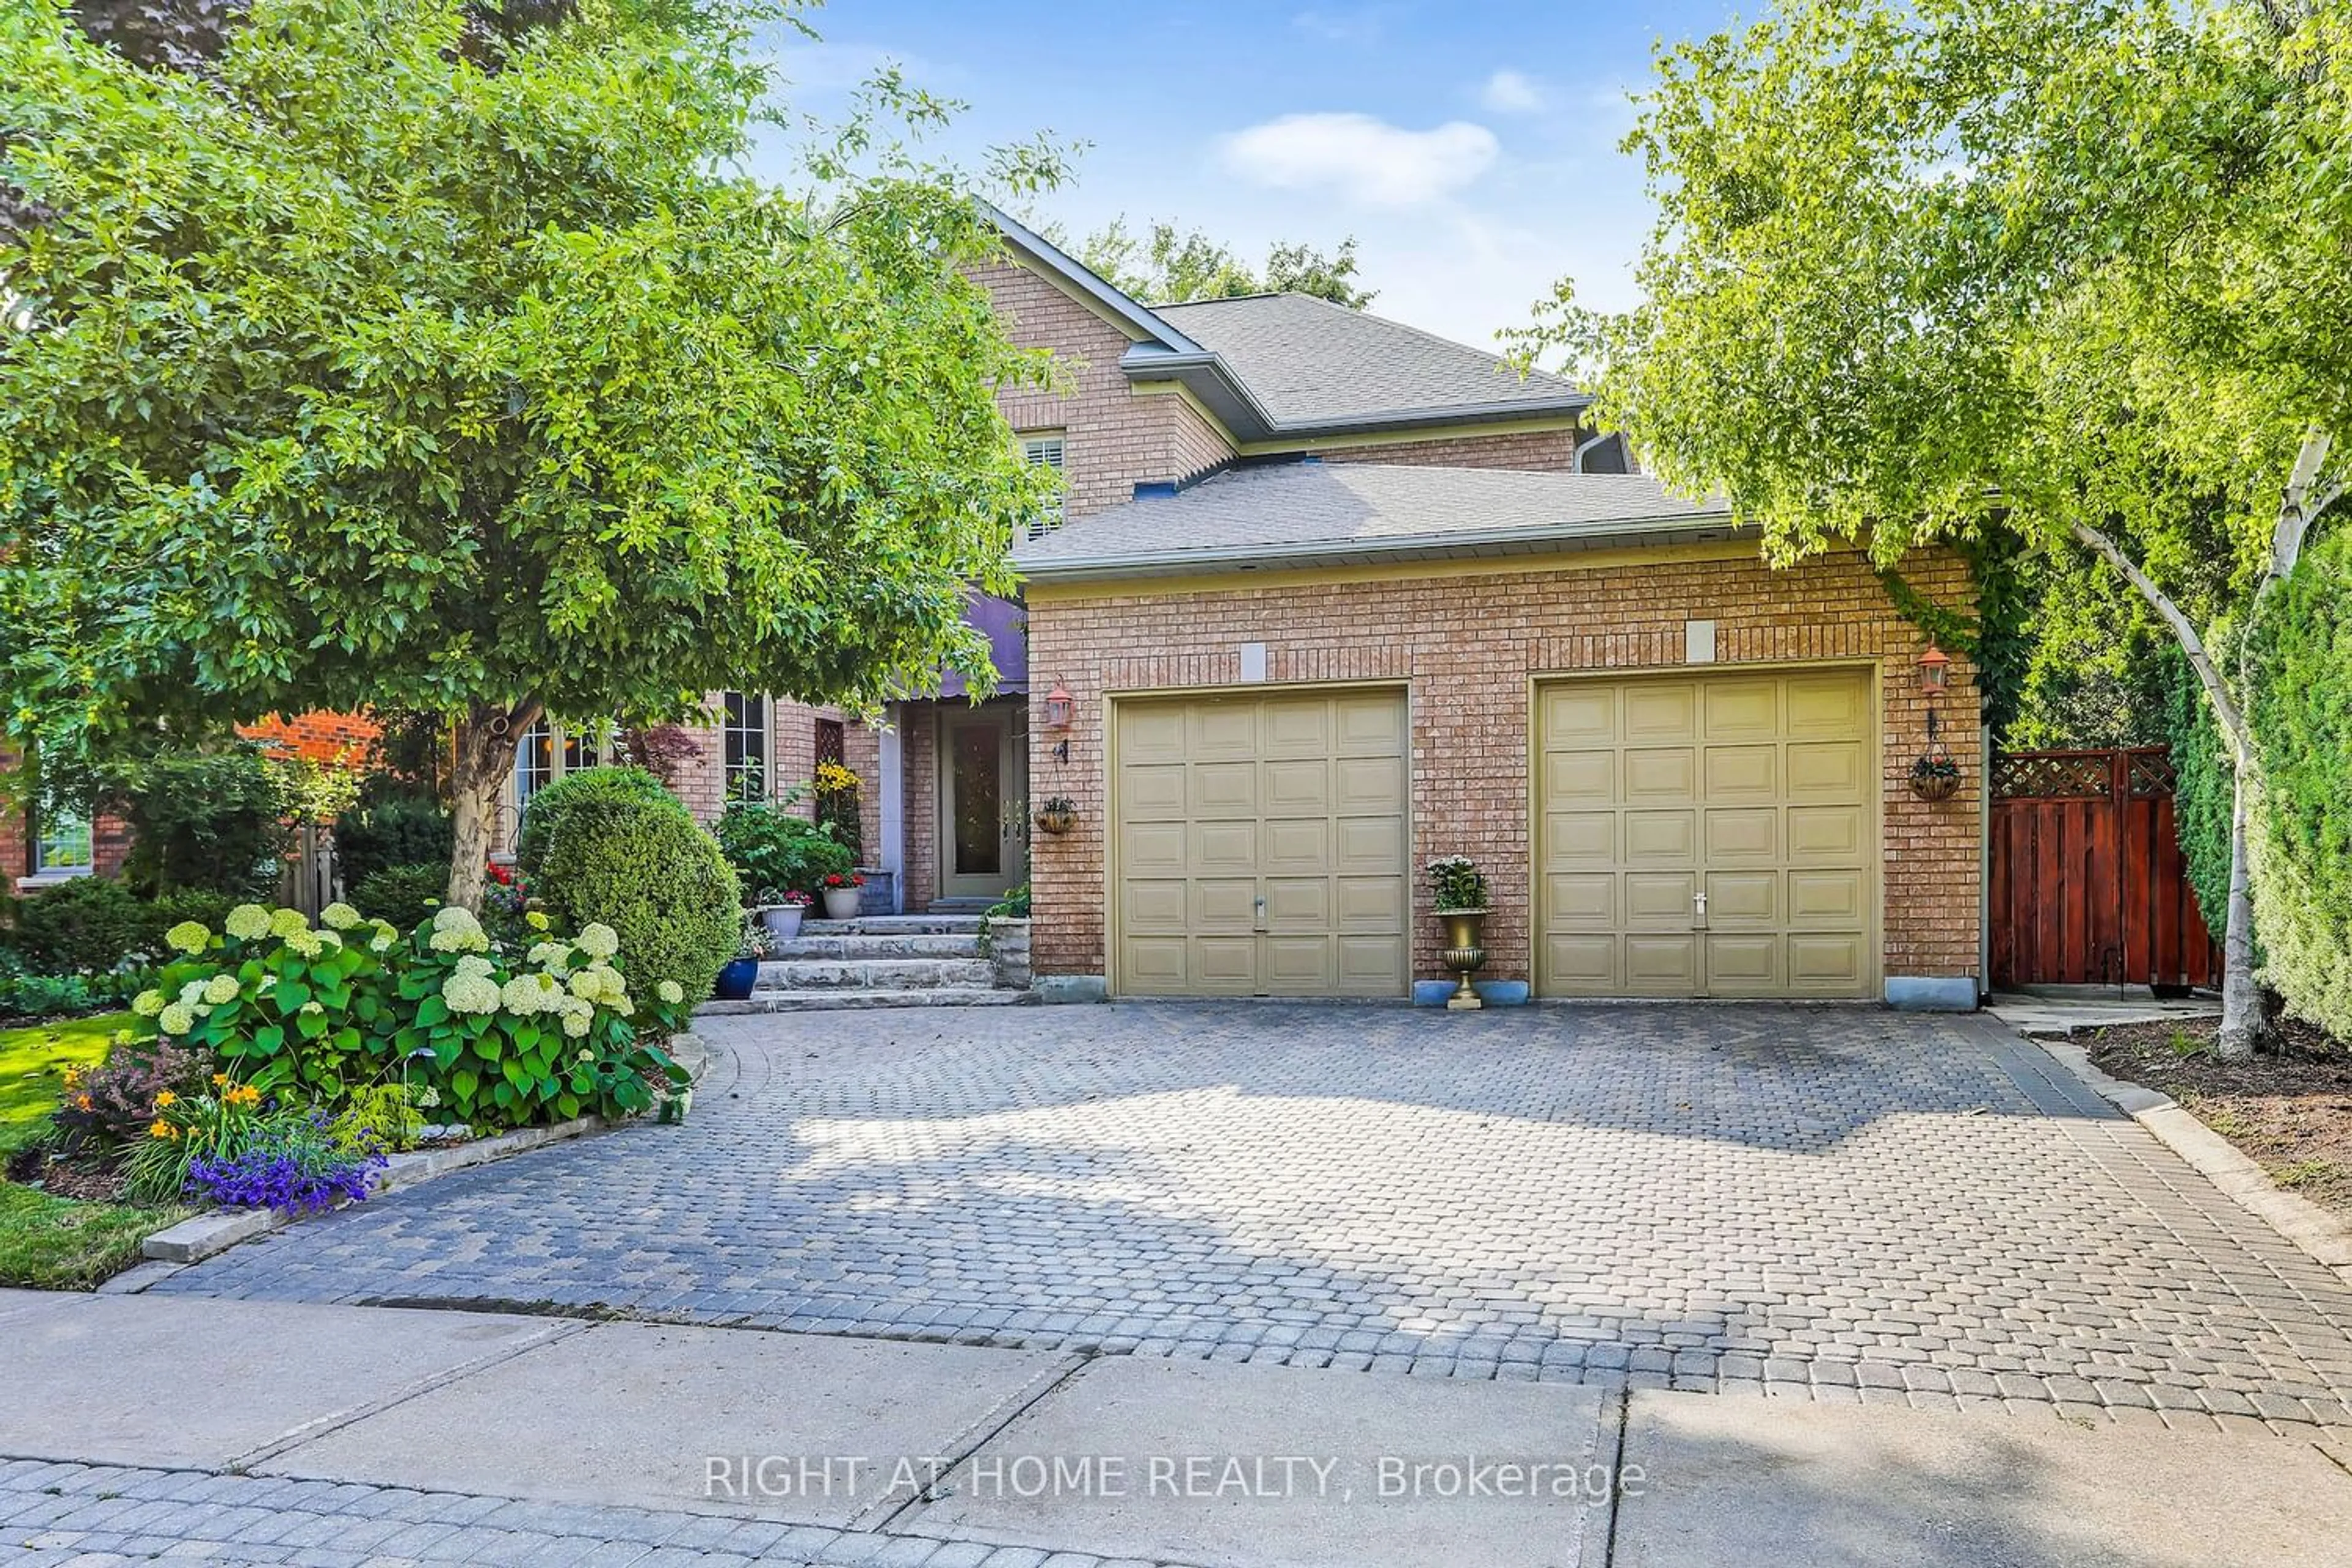 Home with brick exterior material for 40 King's Cross Ave, Richmond Hill Ontario L4B 2S9